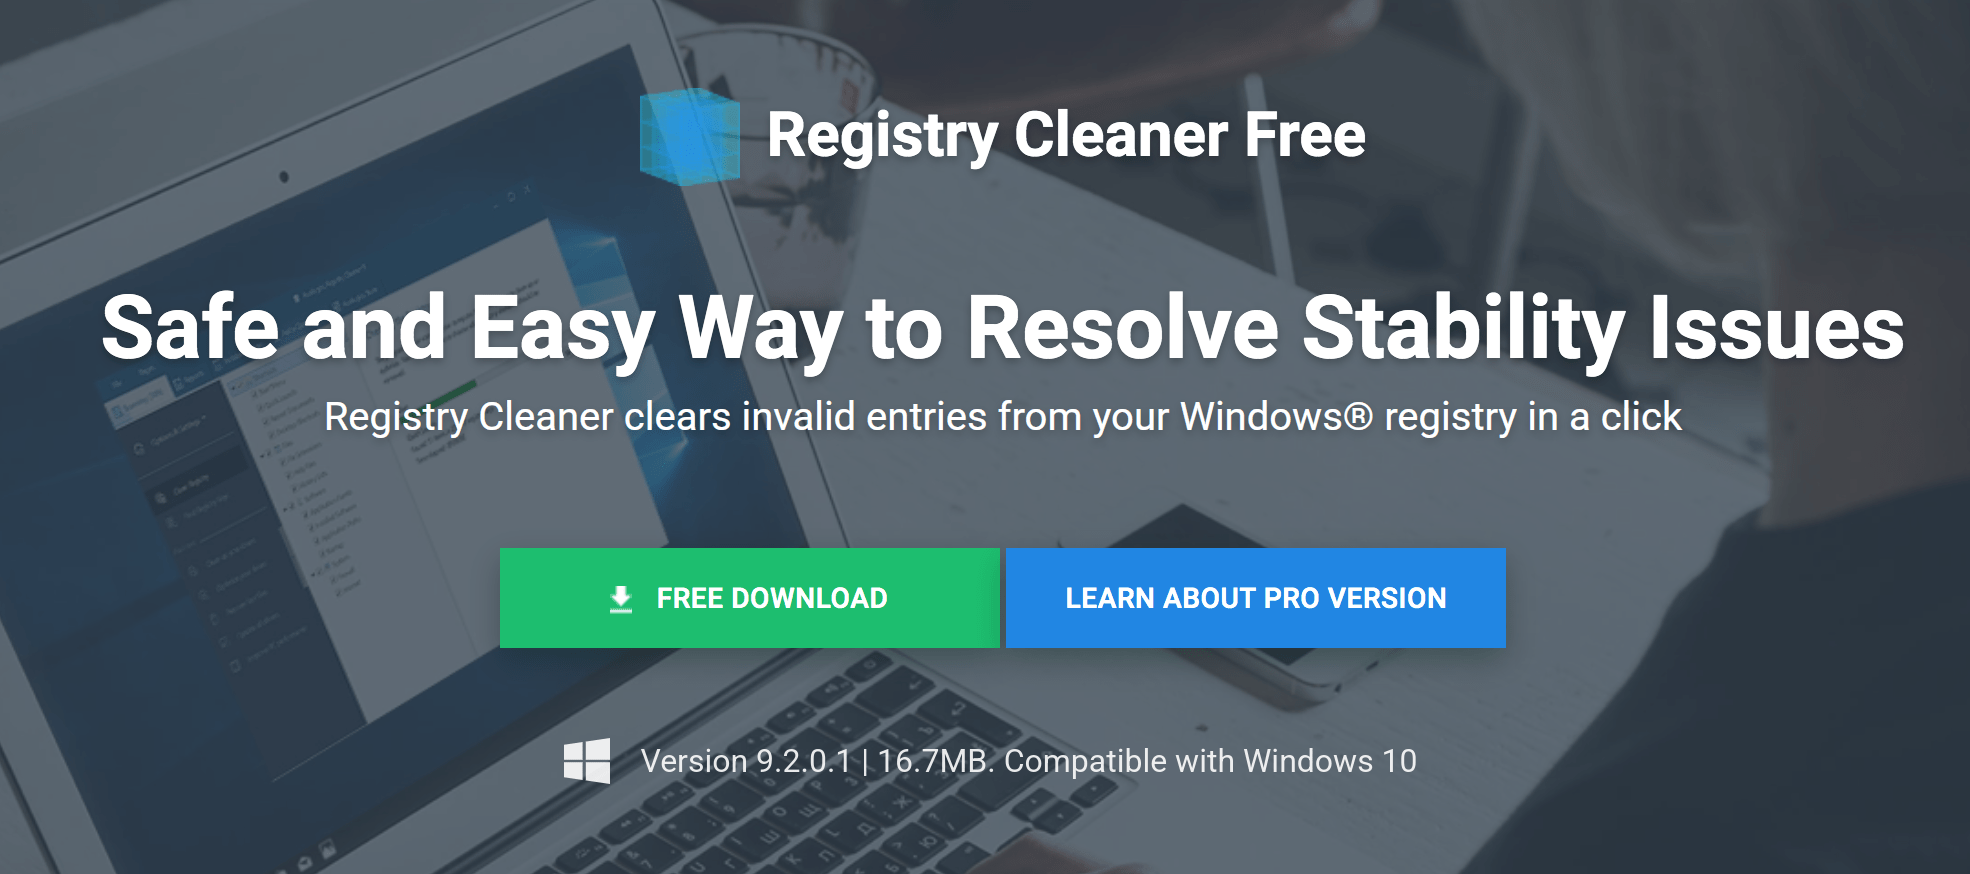 Efficiently clean up your Registry in just a few clicks